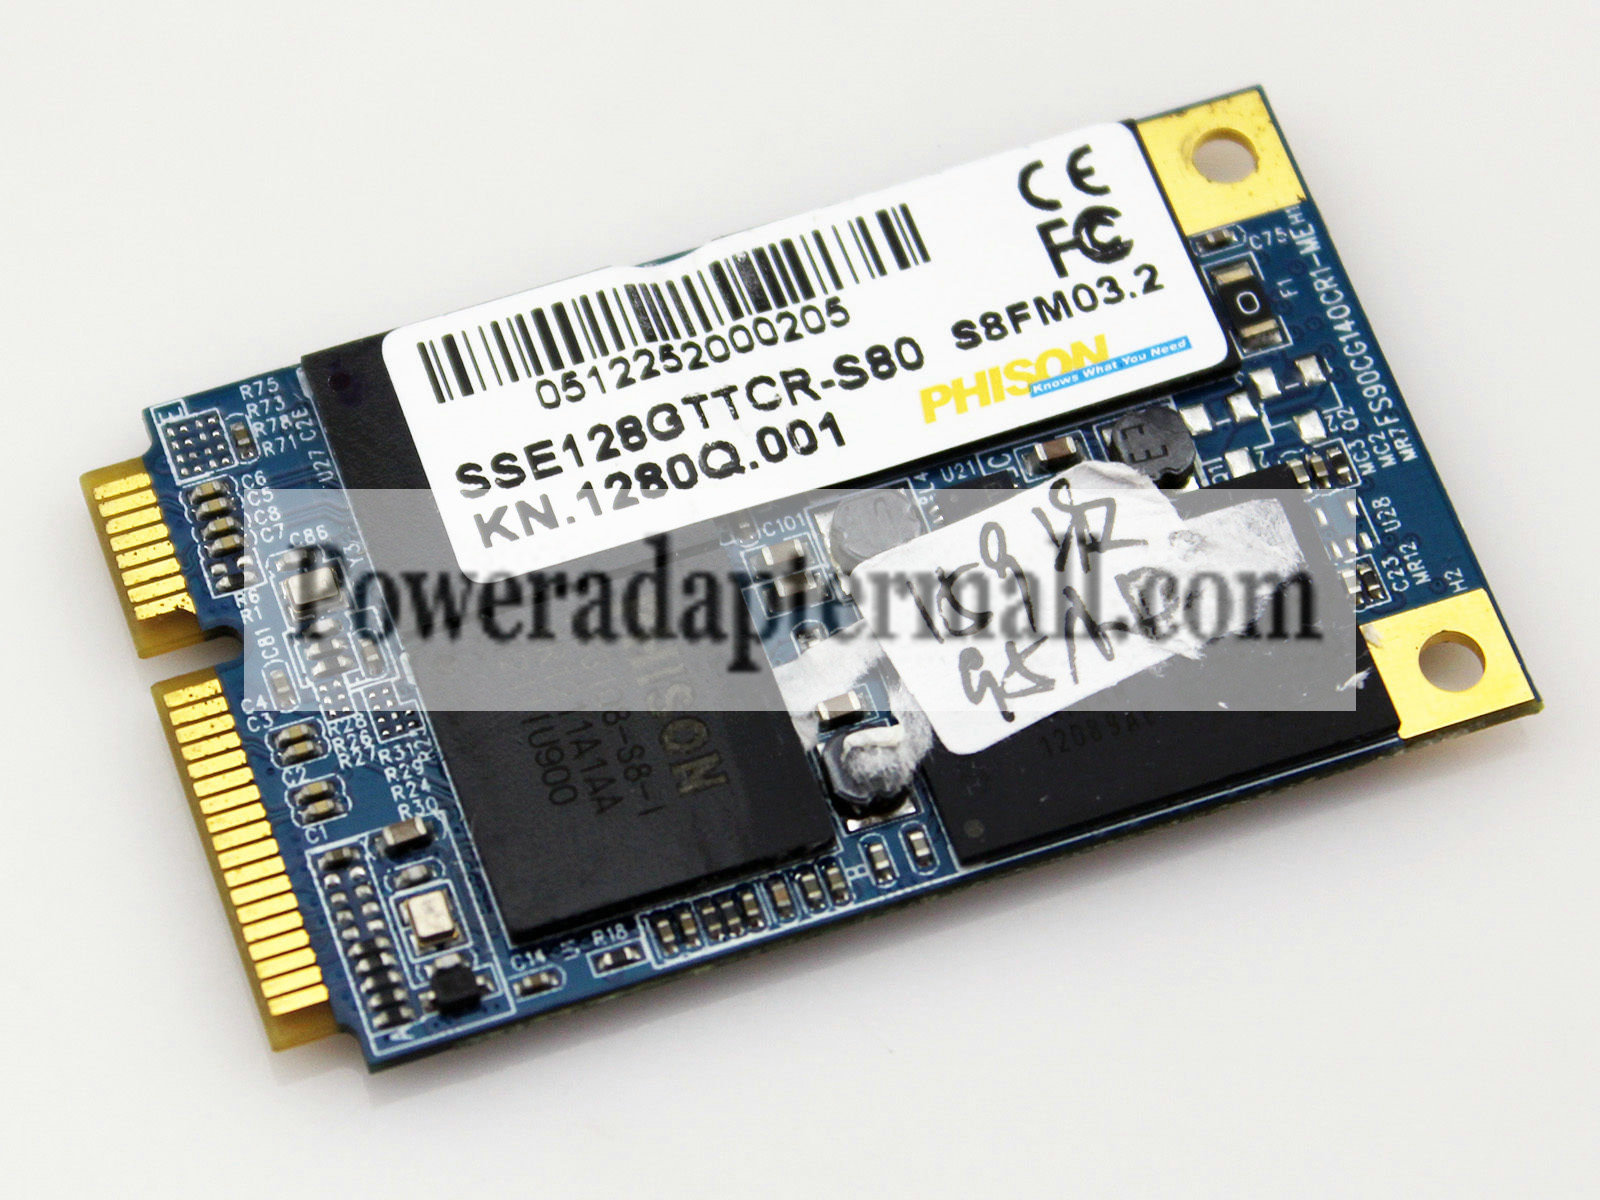 PHISON 128GB SSD MSATA SSE128GTTCR-S80 KN.1280Q.001 Solid State